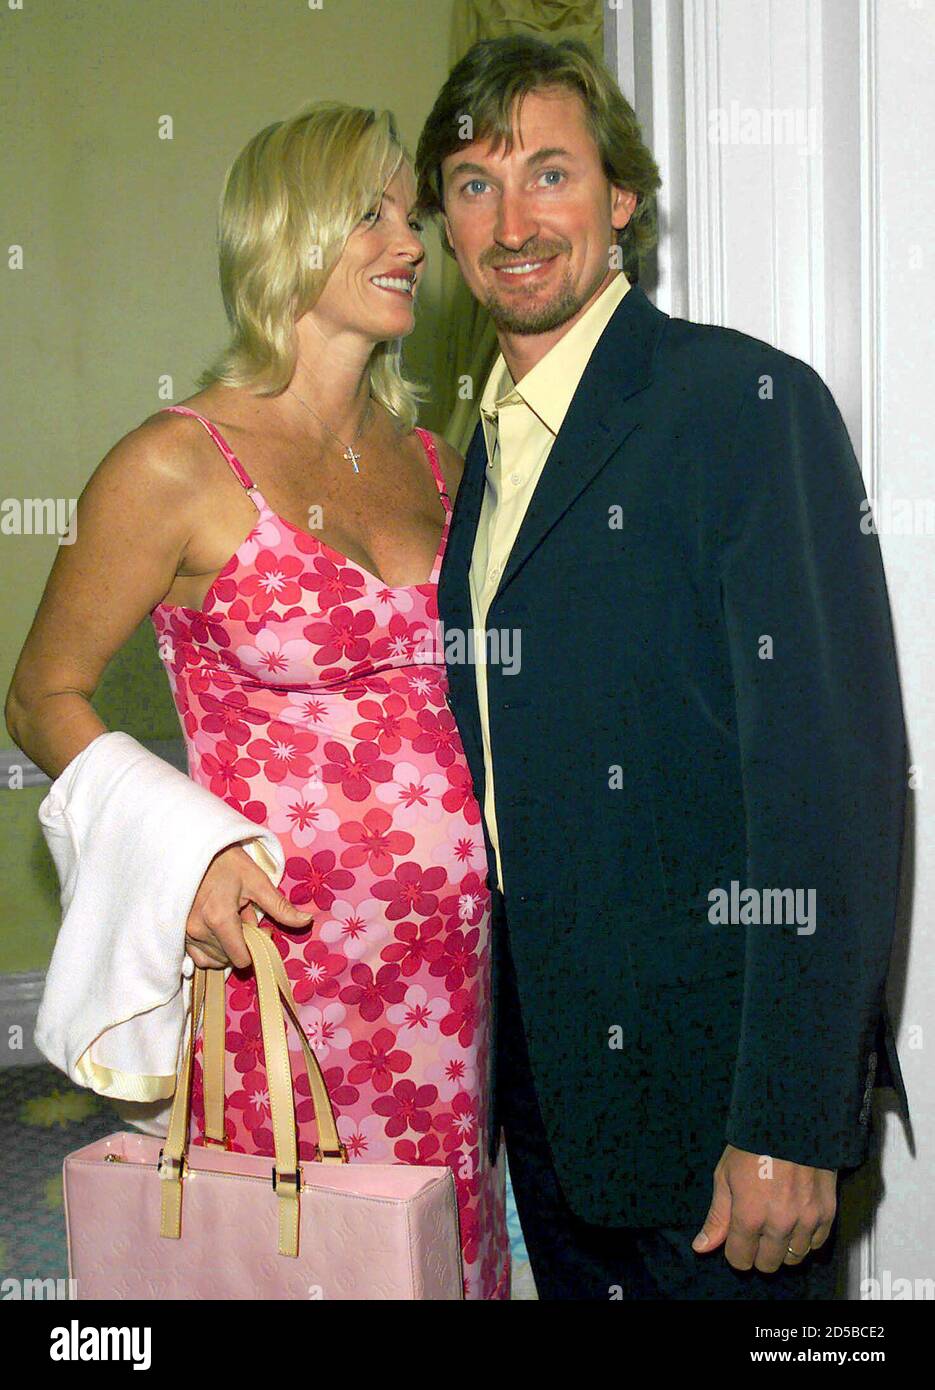 Janet Jones L Talks To Her Husband Wayne Gretzky At The National Academy Of Recording Arts Sciences Naras Award Luncheon At The Beverly Hills Hotel In Beverly Hills On June 15